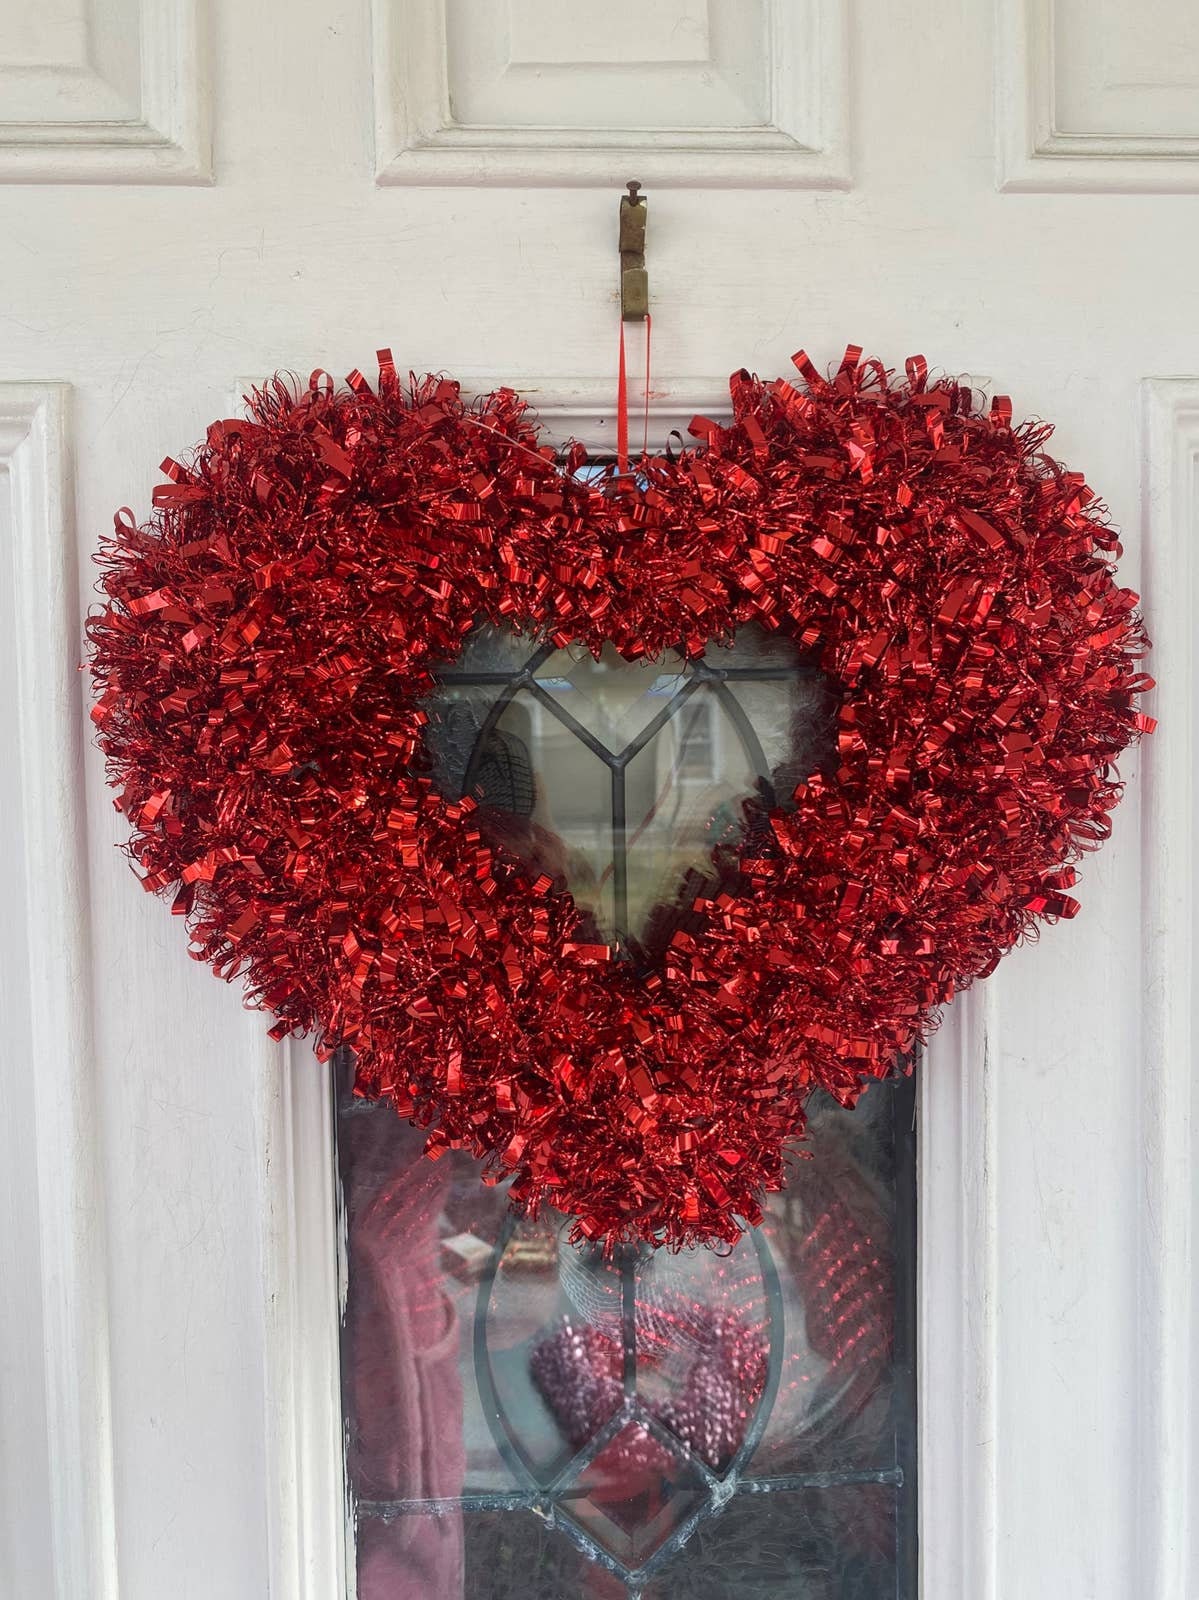 The Holiday Aisle® 15'' Heart Wreath Red Burlap Heart Shaped